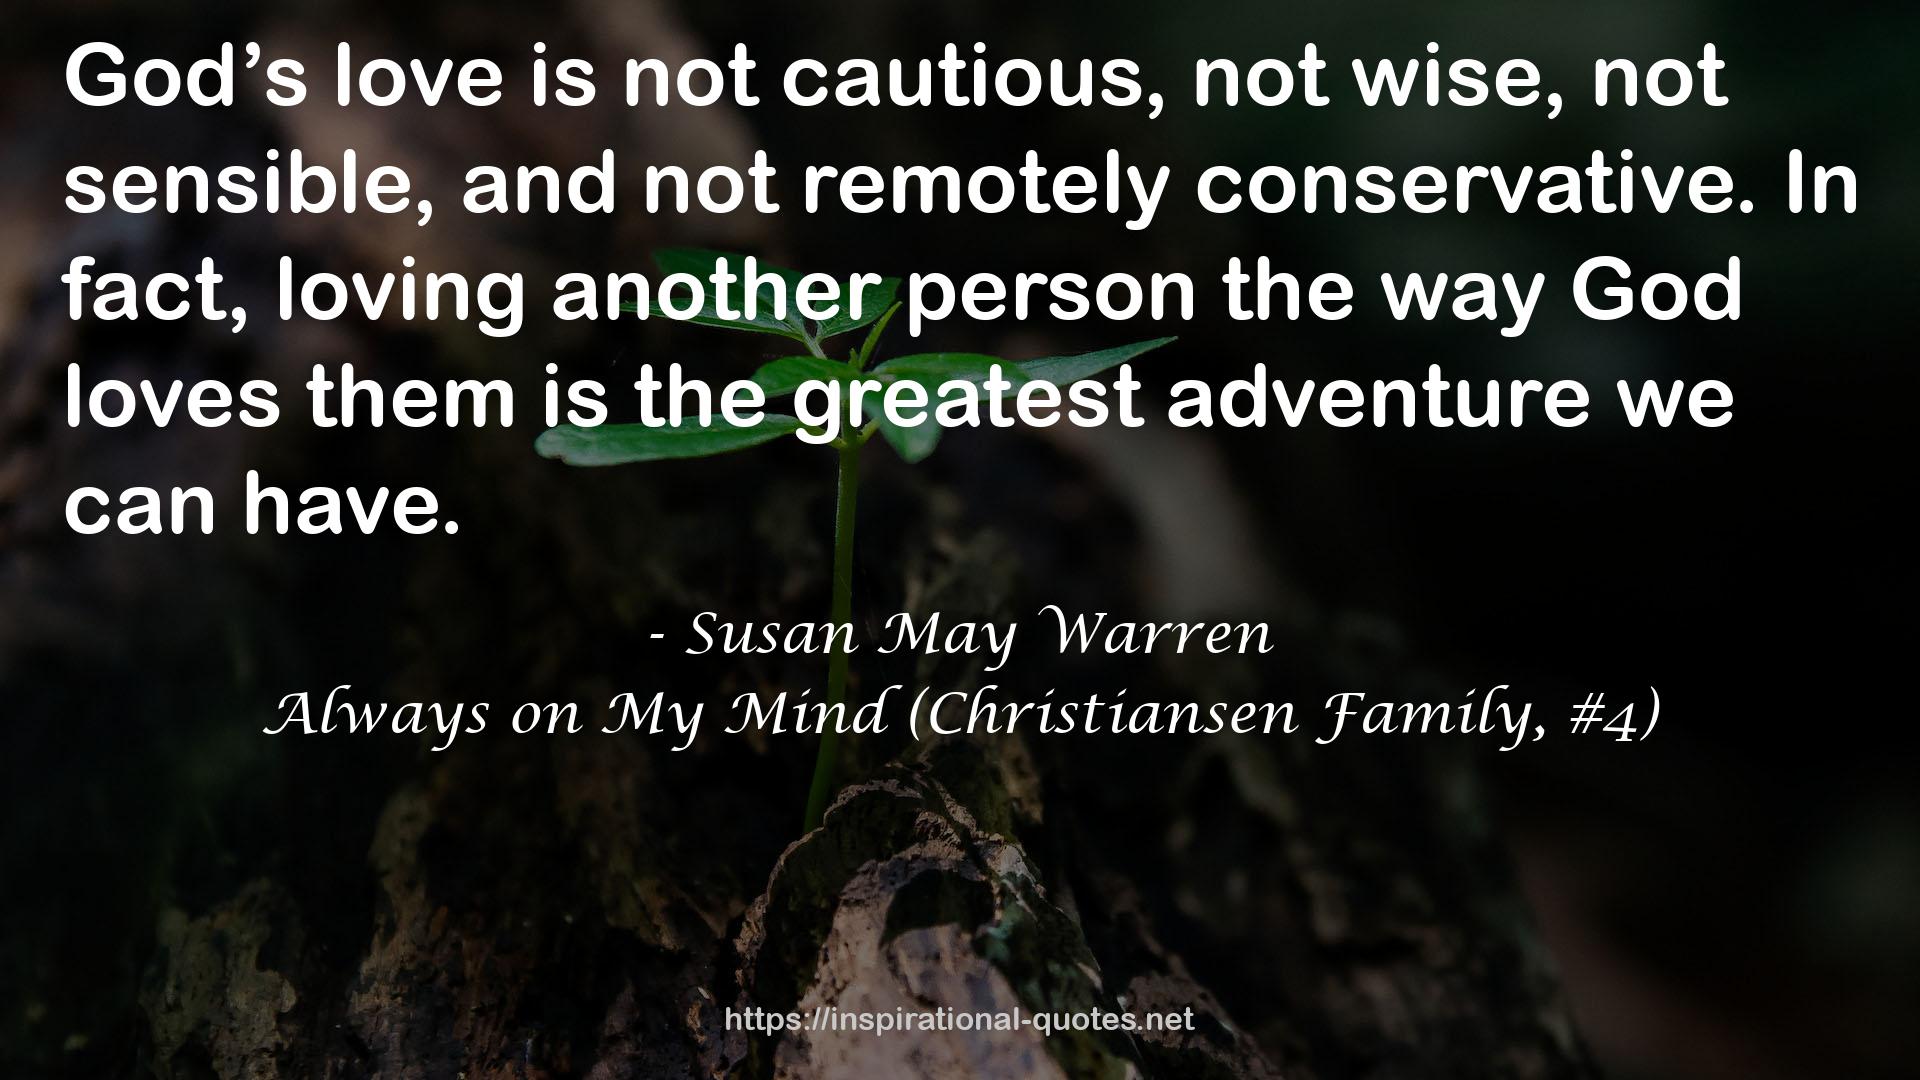 Always on My Mind (Christiansen Family, #4) QUOTES